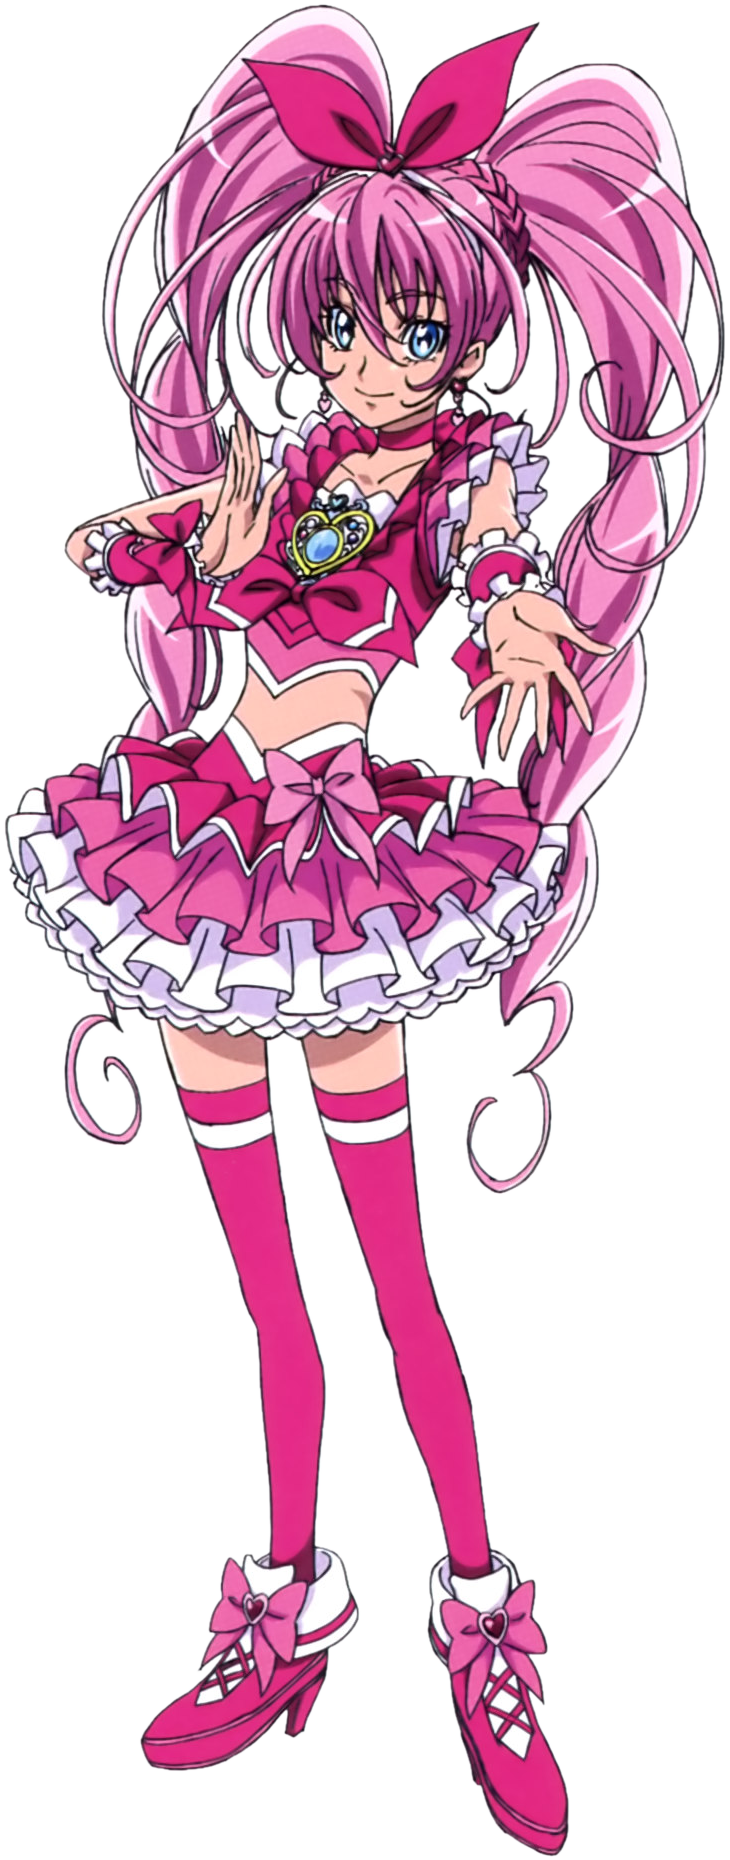 Image Suite Pretty Cure Cure Melody Pose5png Magical Girl Mahou Shoujo 魔法少女 Wiki